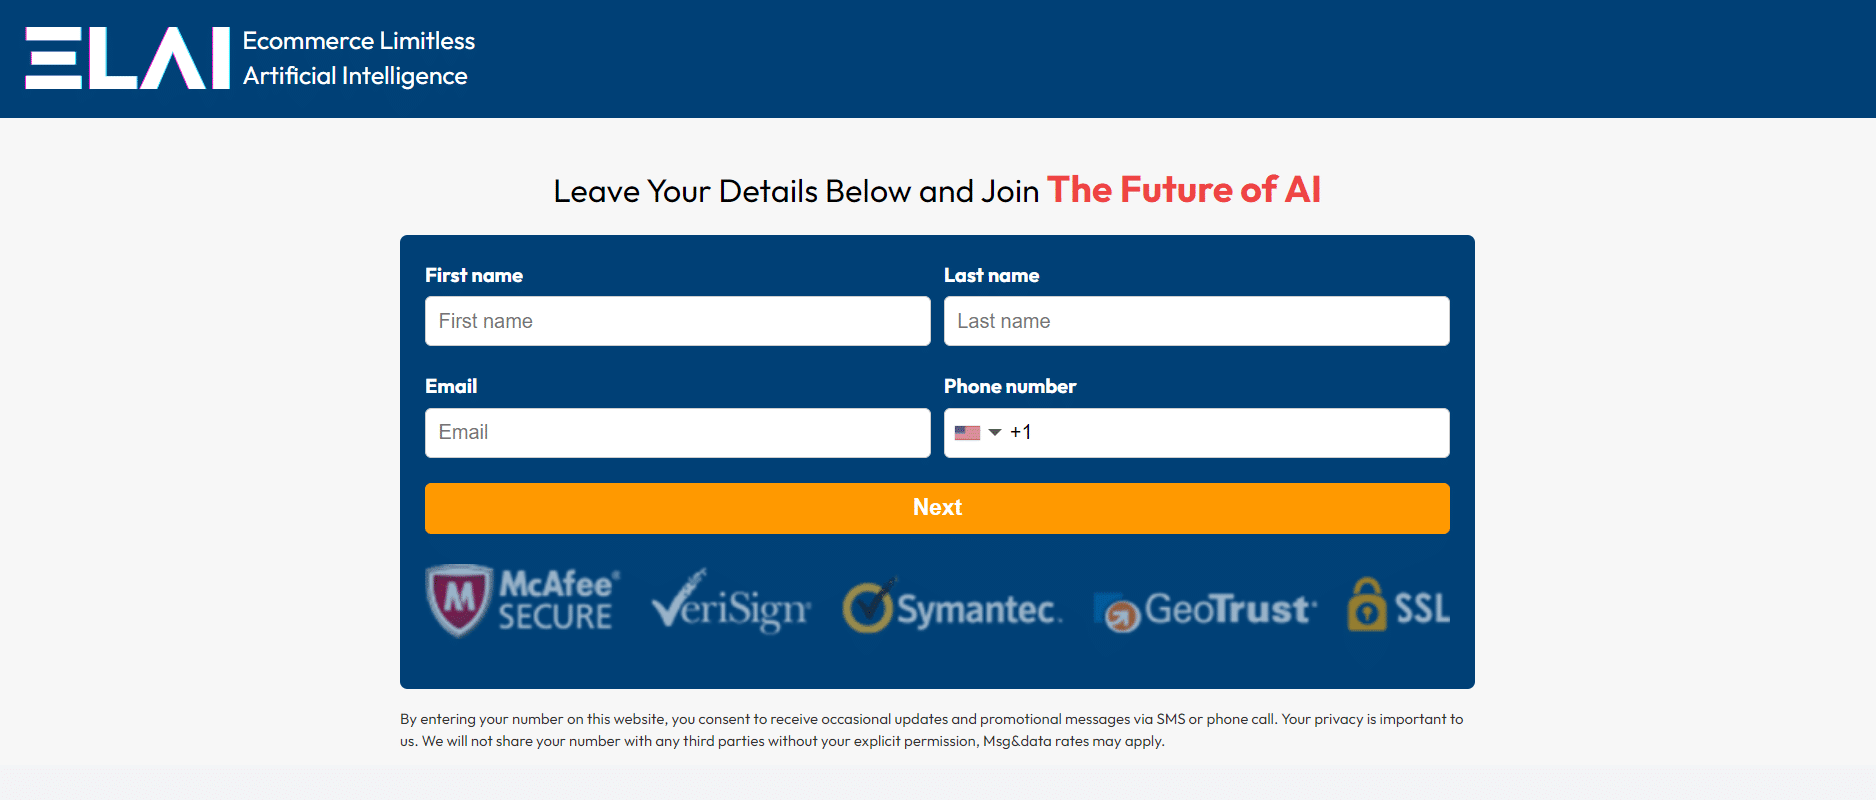 Ecommerce Limitless Artificial Intelligence form